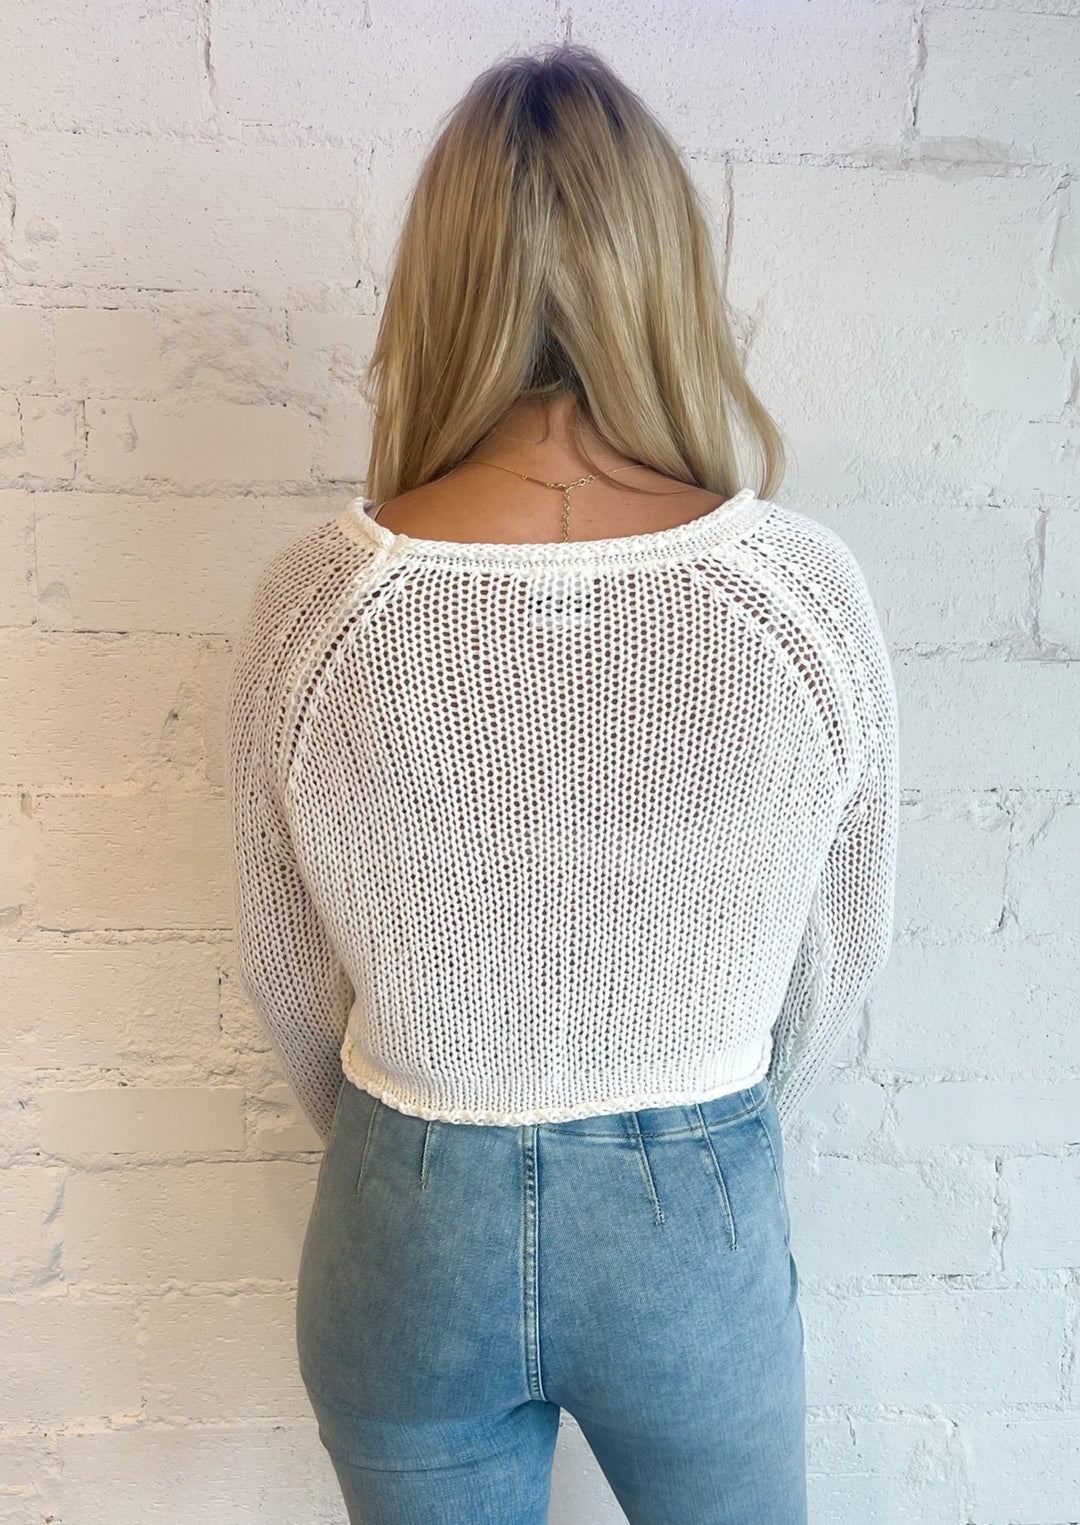 Victoria Sweater, Sweaters, Adeline, Adeline, dallas boutique, dallas texas, texas boutique, women's boutique dallas, adeline boutique, dallas boutique, trendy boutique, affordable boutique